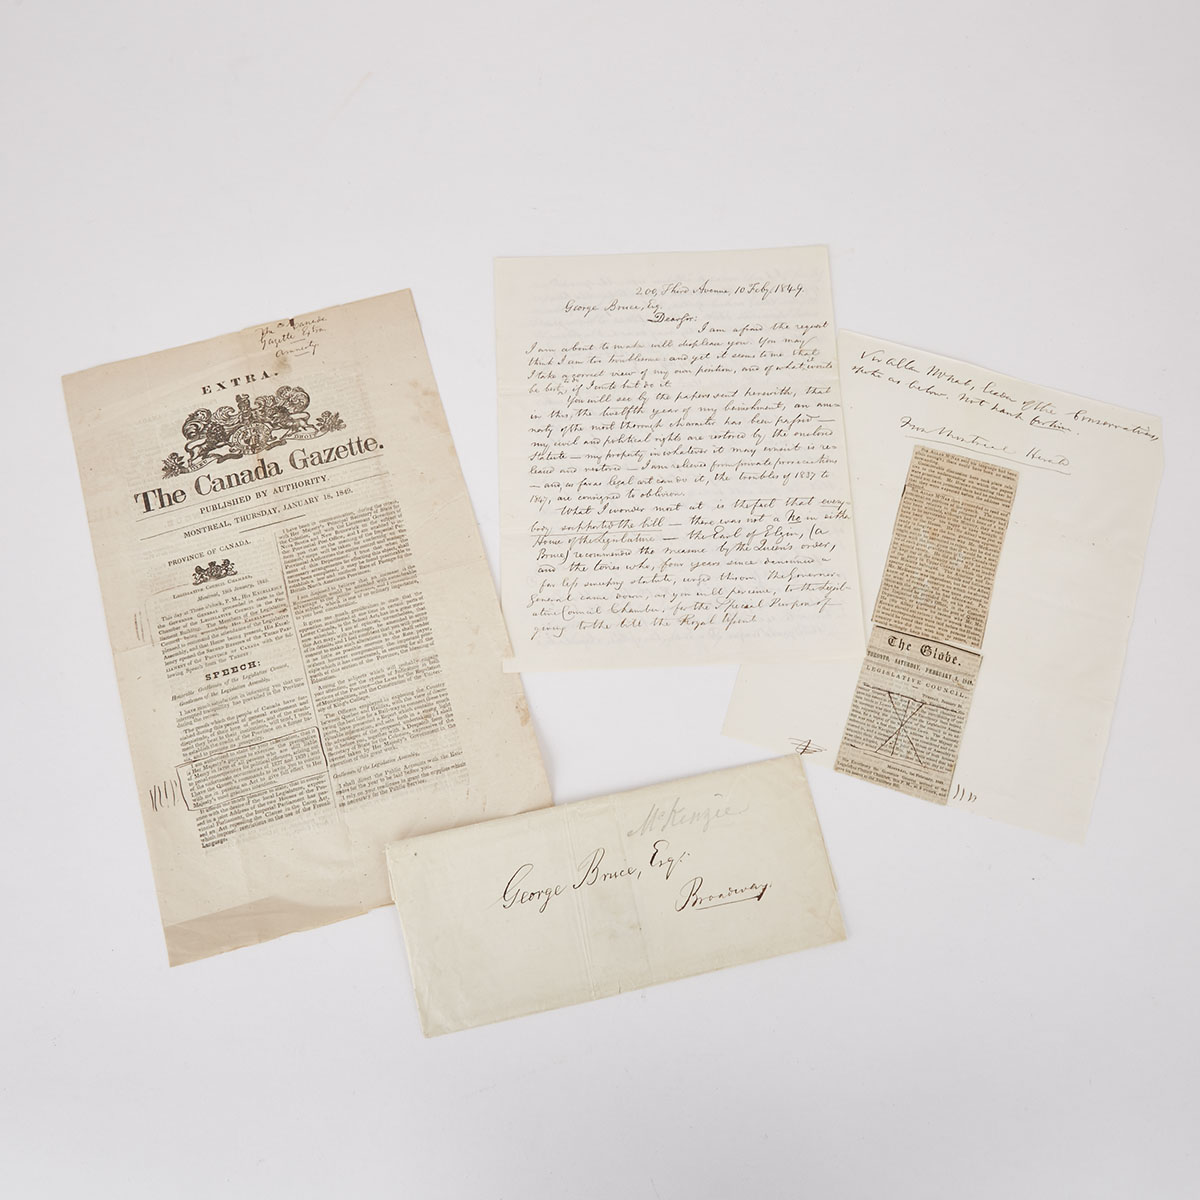 William Lyon Mackenzie Letter and Archive, 10 Feb. 1849